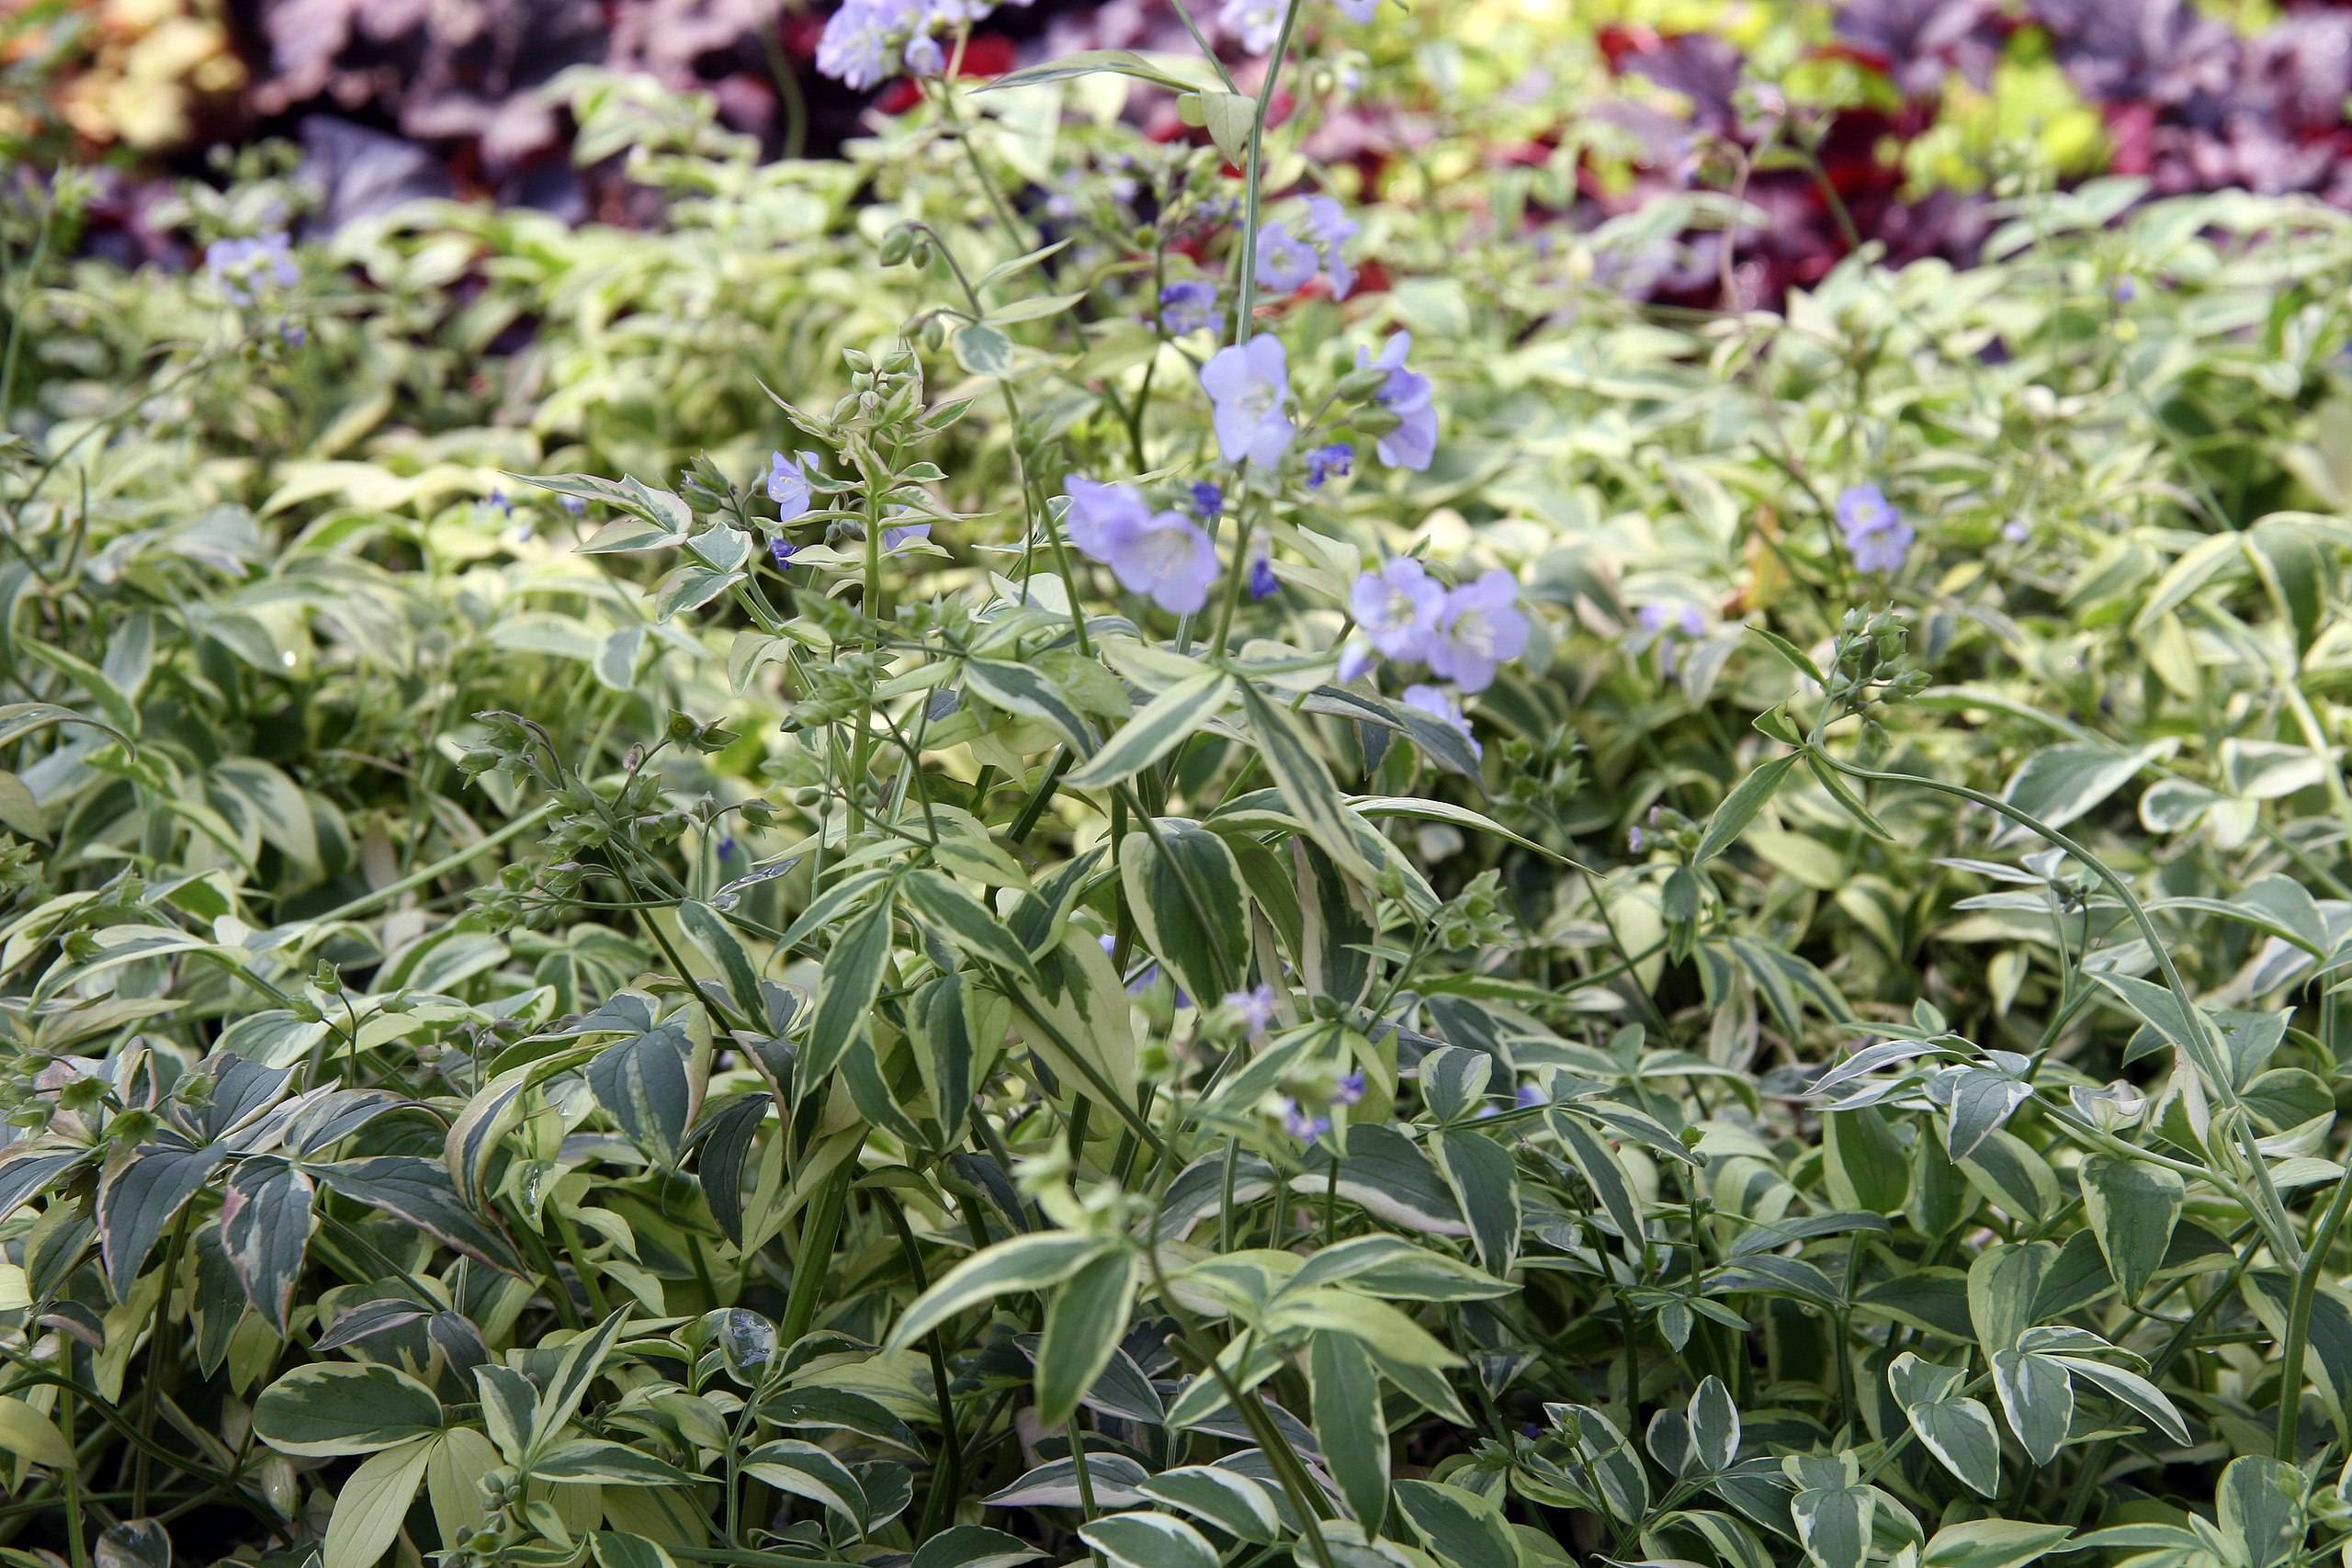 light-blue flowers with blue buds, yellow-green leaves and olive stems